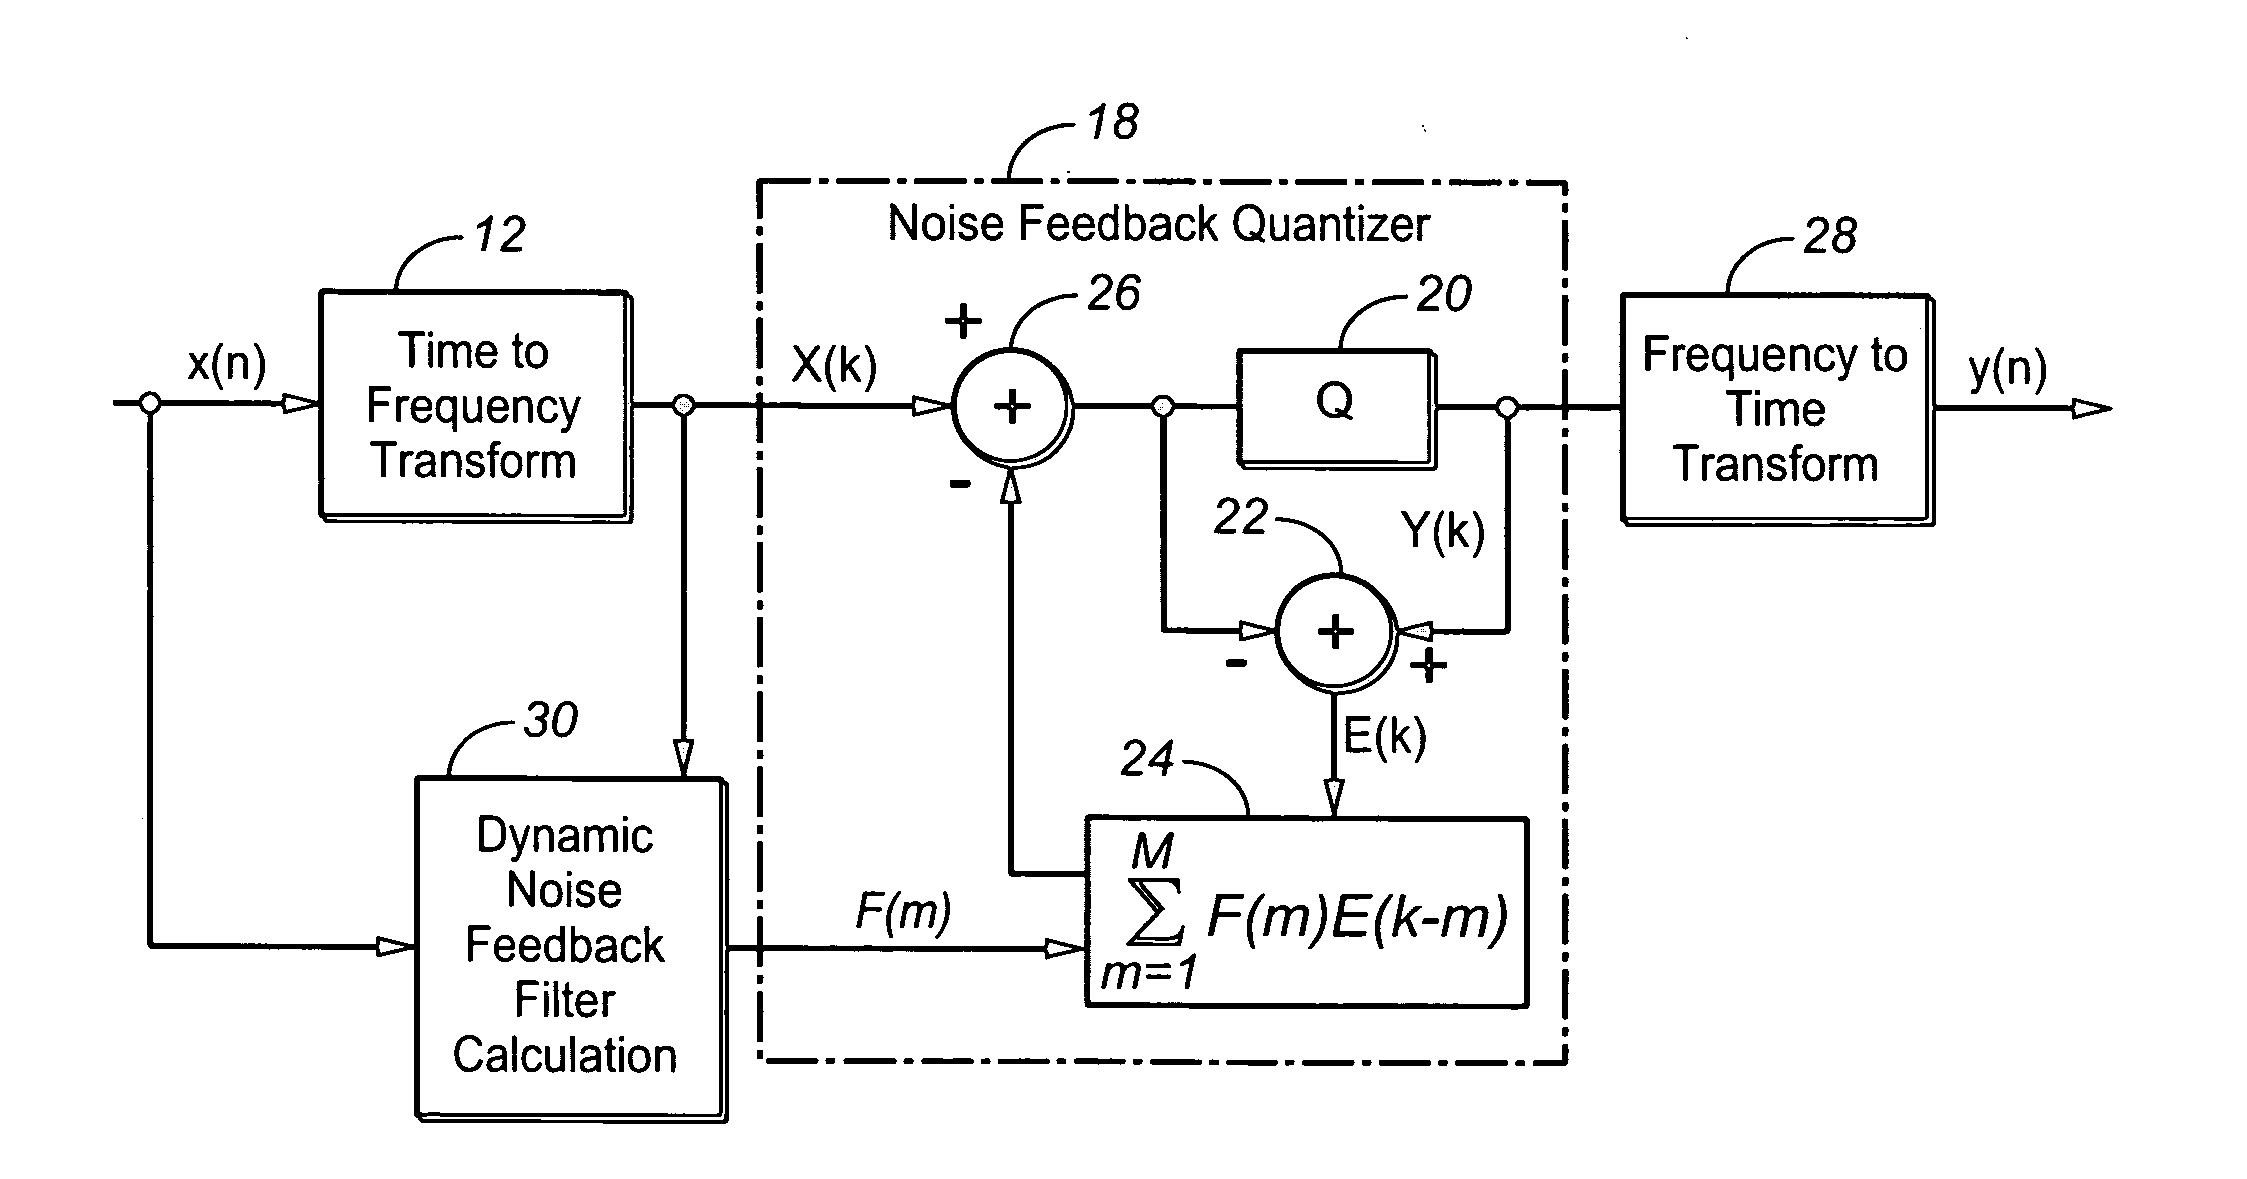 Arbitrary shaping of temporal noise envelope without side-information